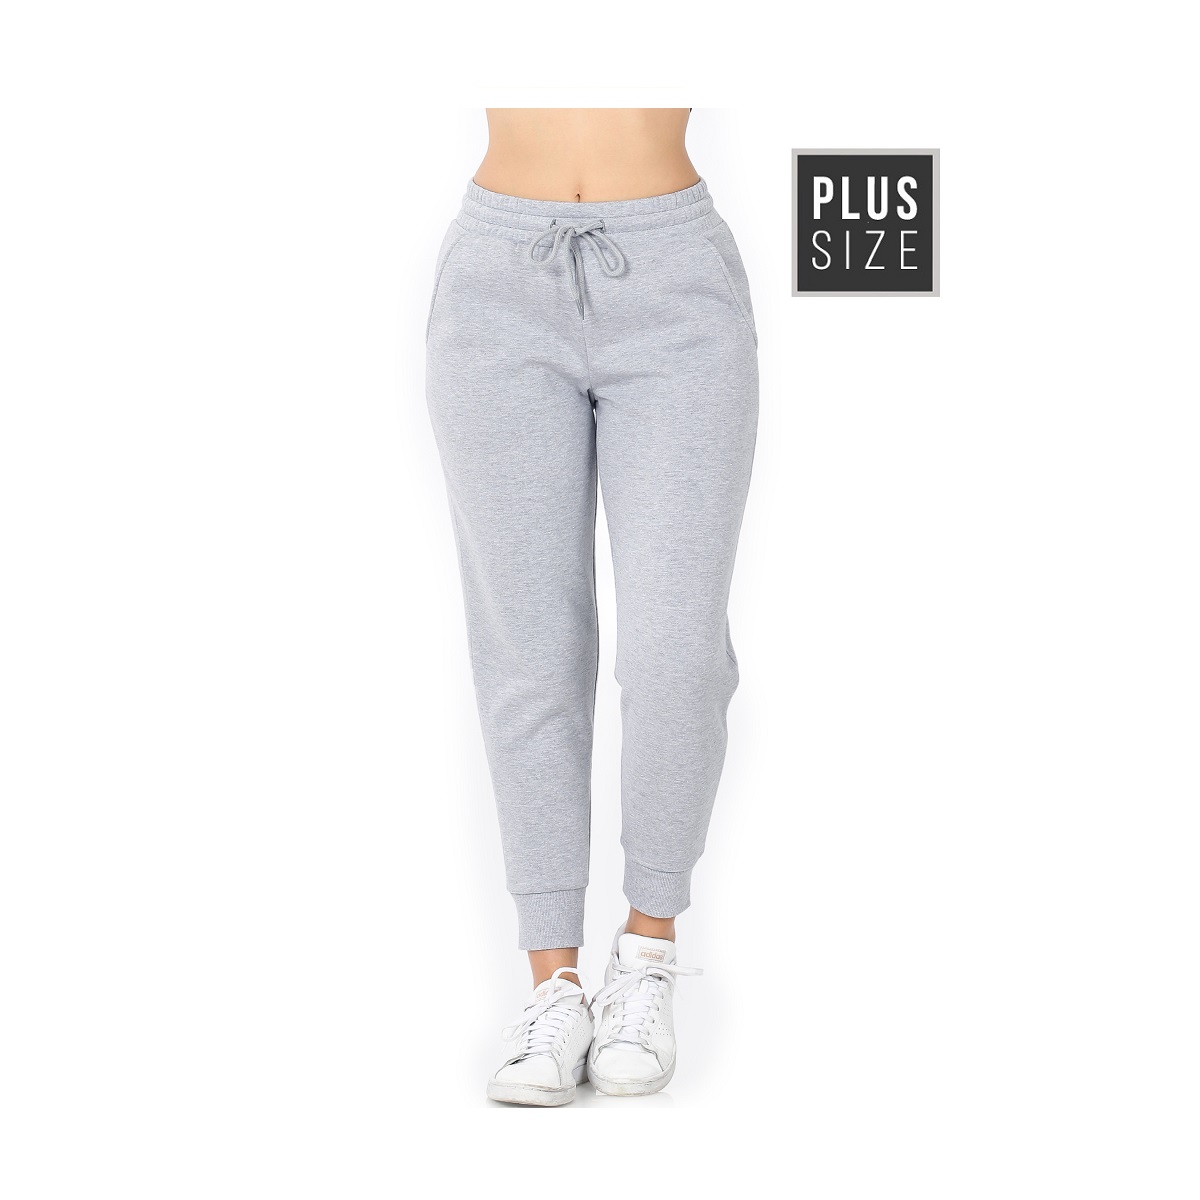 Women's Plus Size Sweatpants with pockets,  Fleece. Elastic Waistband with Draw String, heather gray,